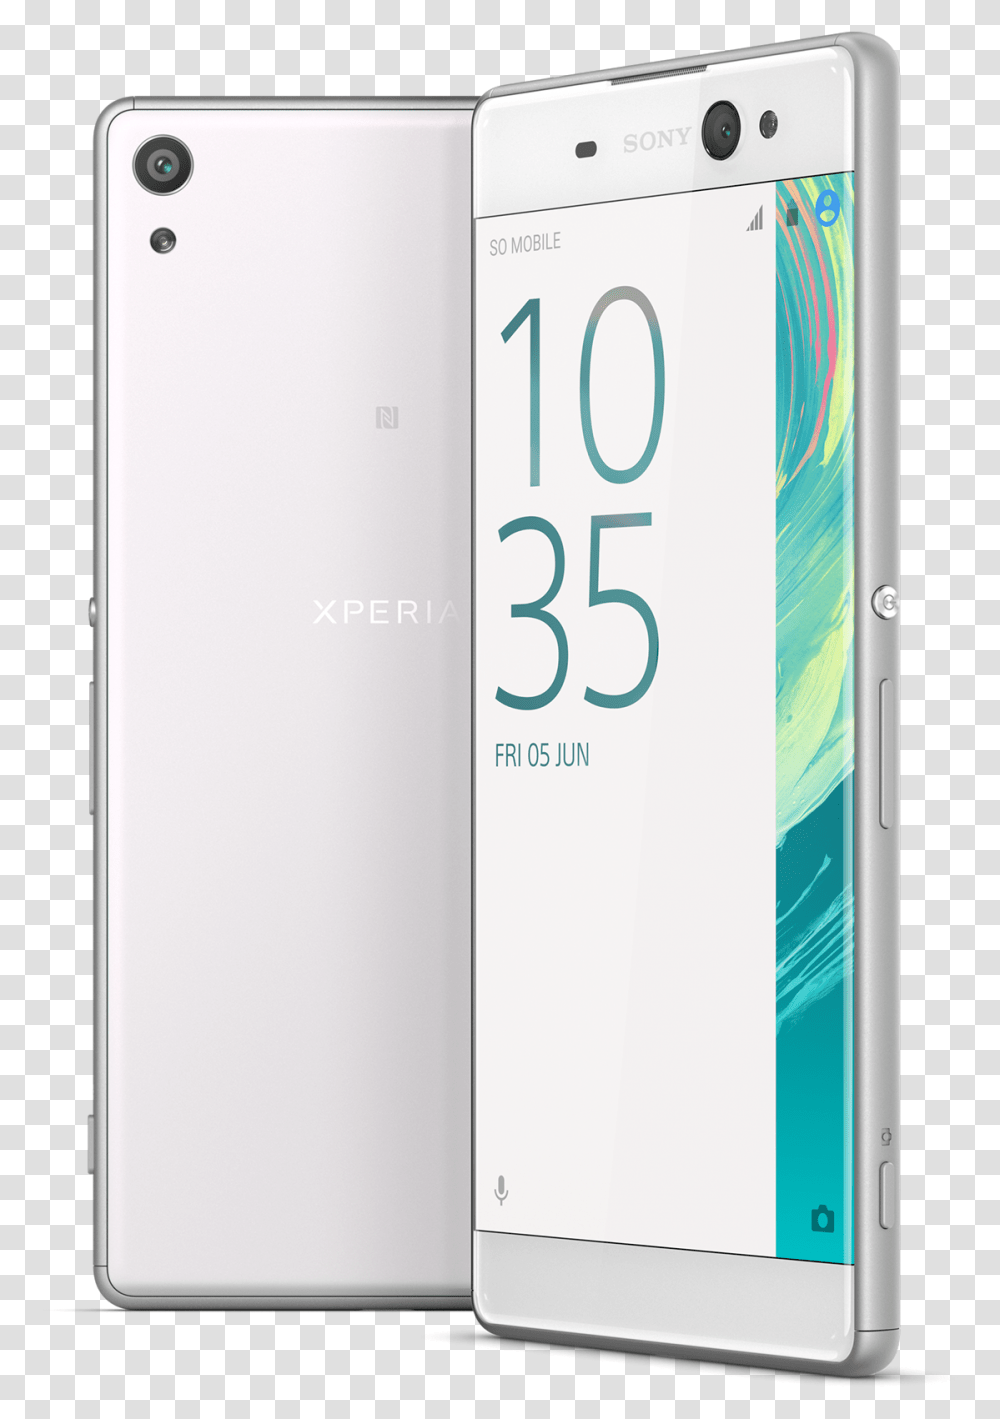 Sony Xperia Xa Ultra F3216 Sony Xperia Xa Ultra, Mobile Phone, Electronics, Cell Phone, Iphone Transparent Png